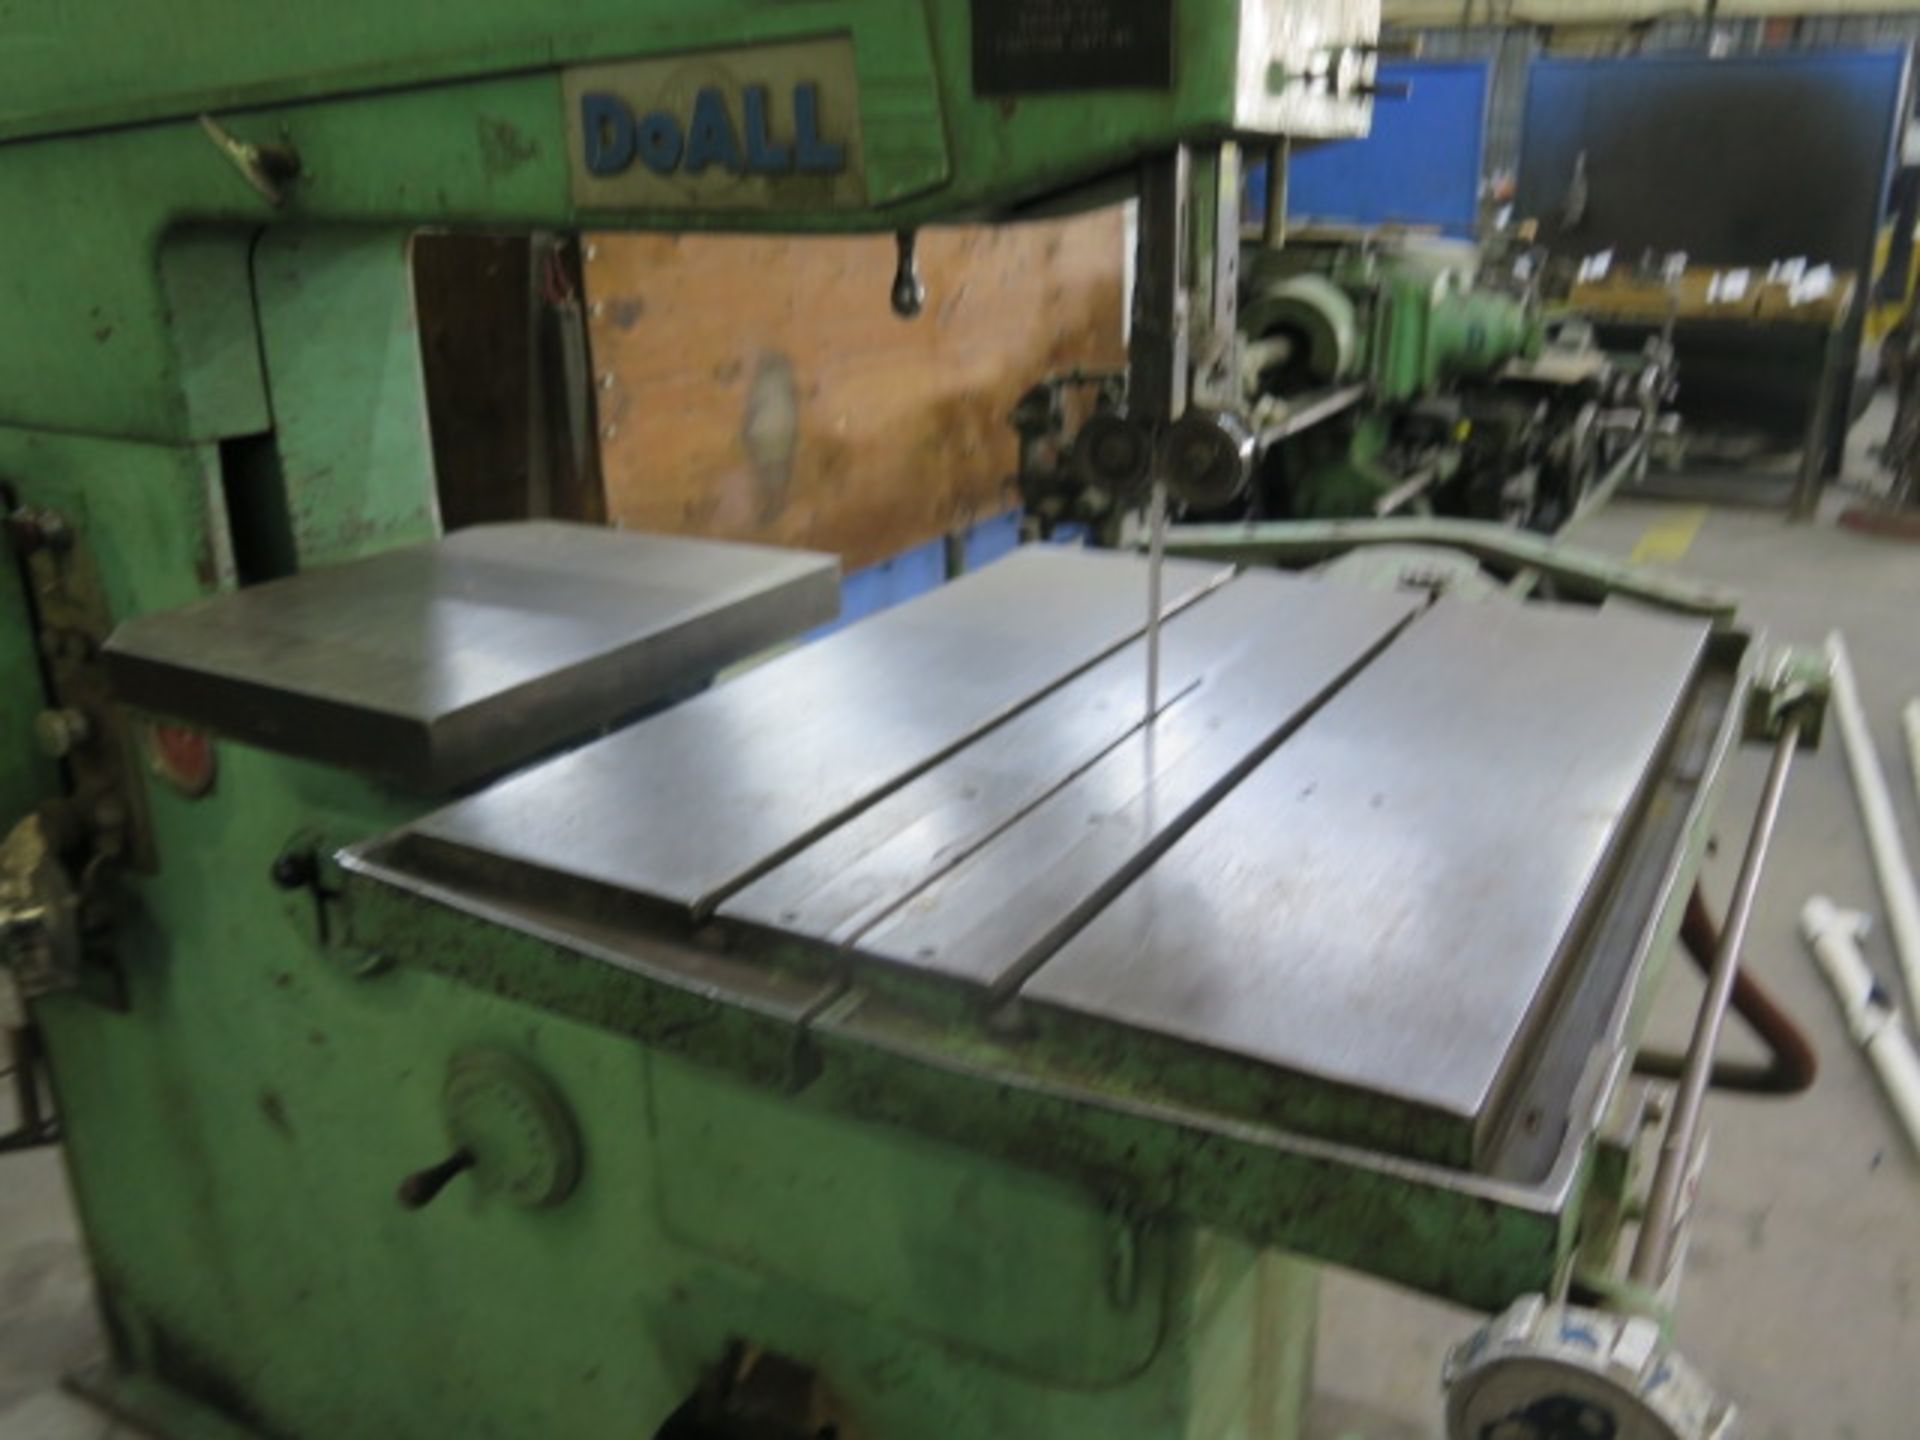 DoAll 36-3 36” Vertical Band Saw s/n 53-56296 w/ Blade Welder, 6000 Dial FPM, SOLD AS IS - Image 3 of 8